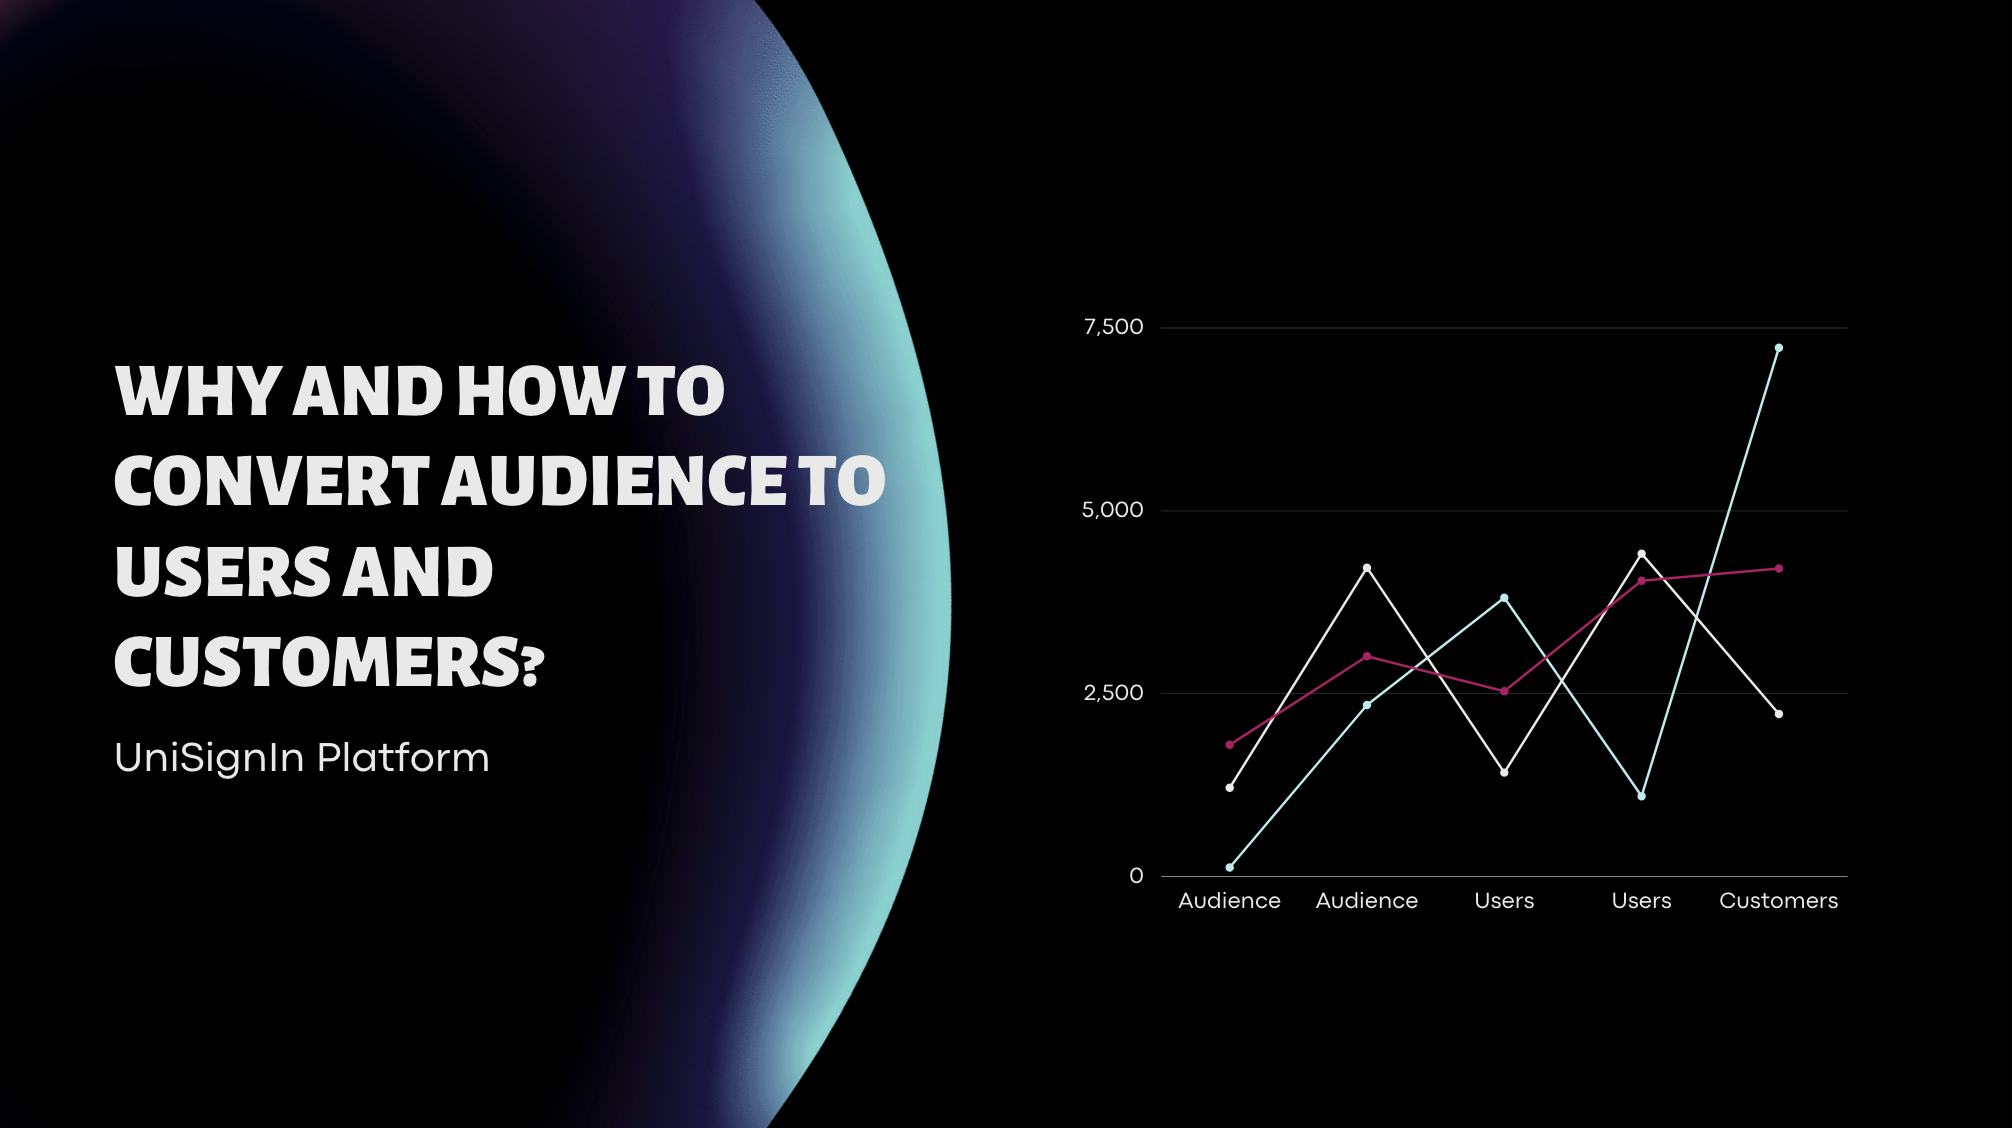 Why and how to convert audience to users and customers?